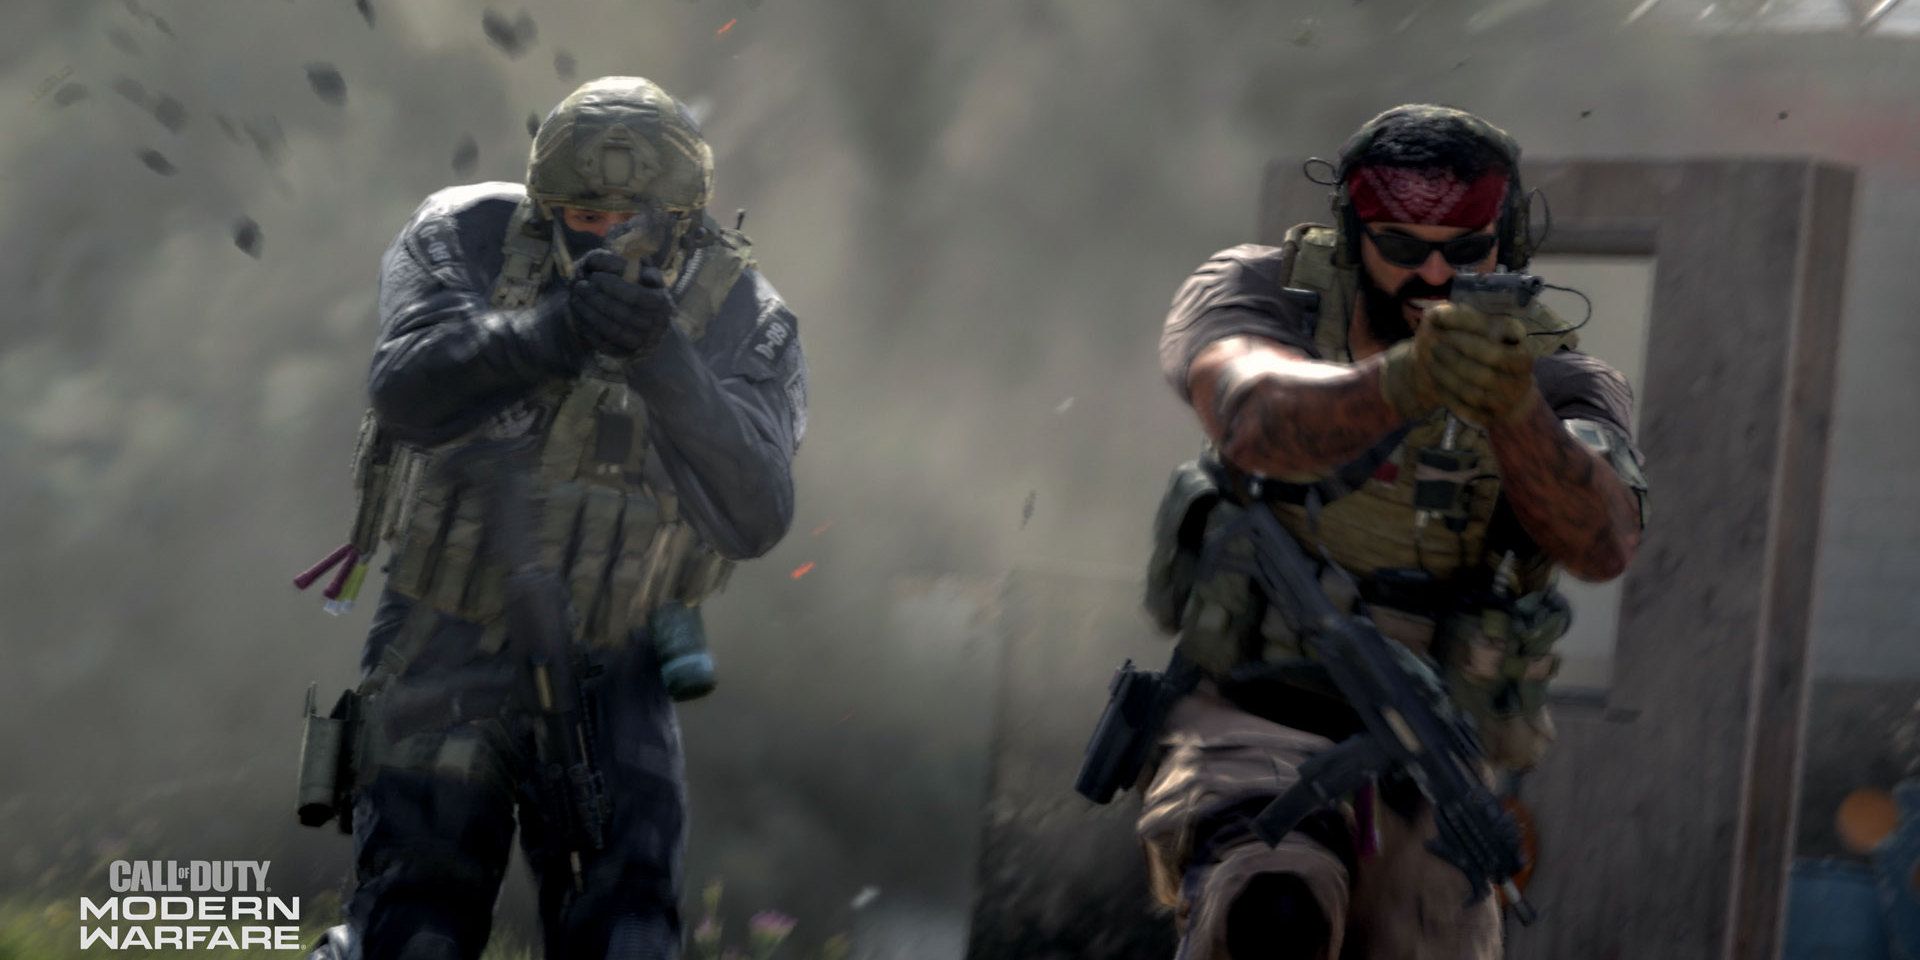 The 10 Best Weapons For Spec Ops In Call Of Duty Modern Warfare